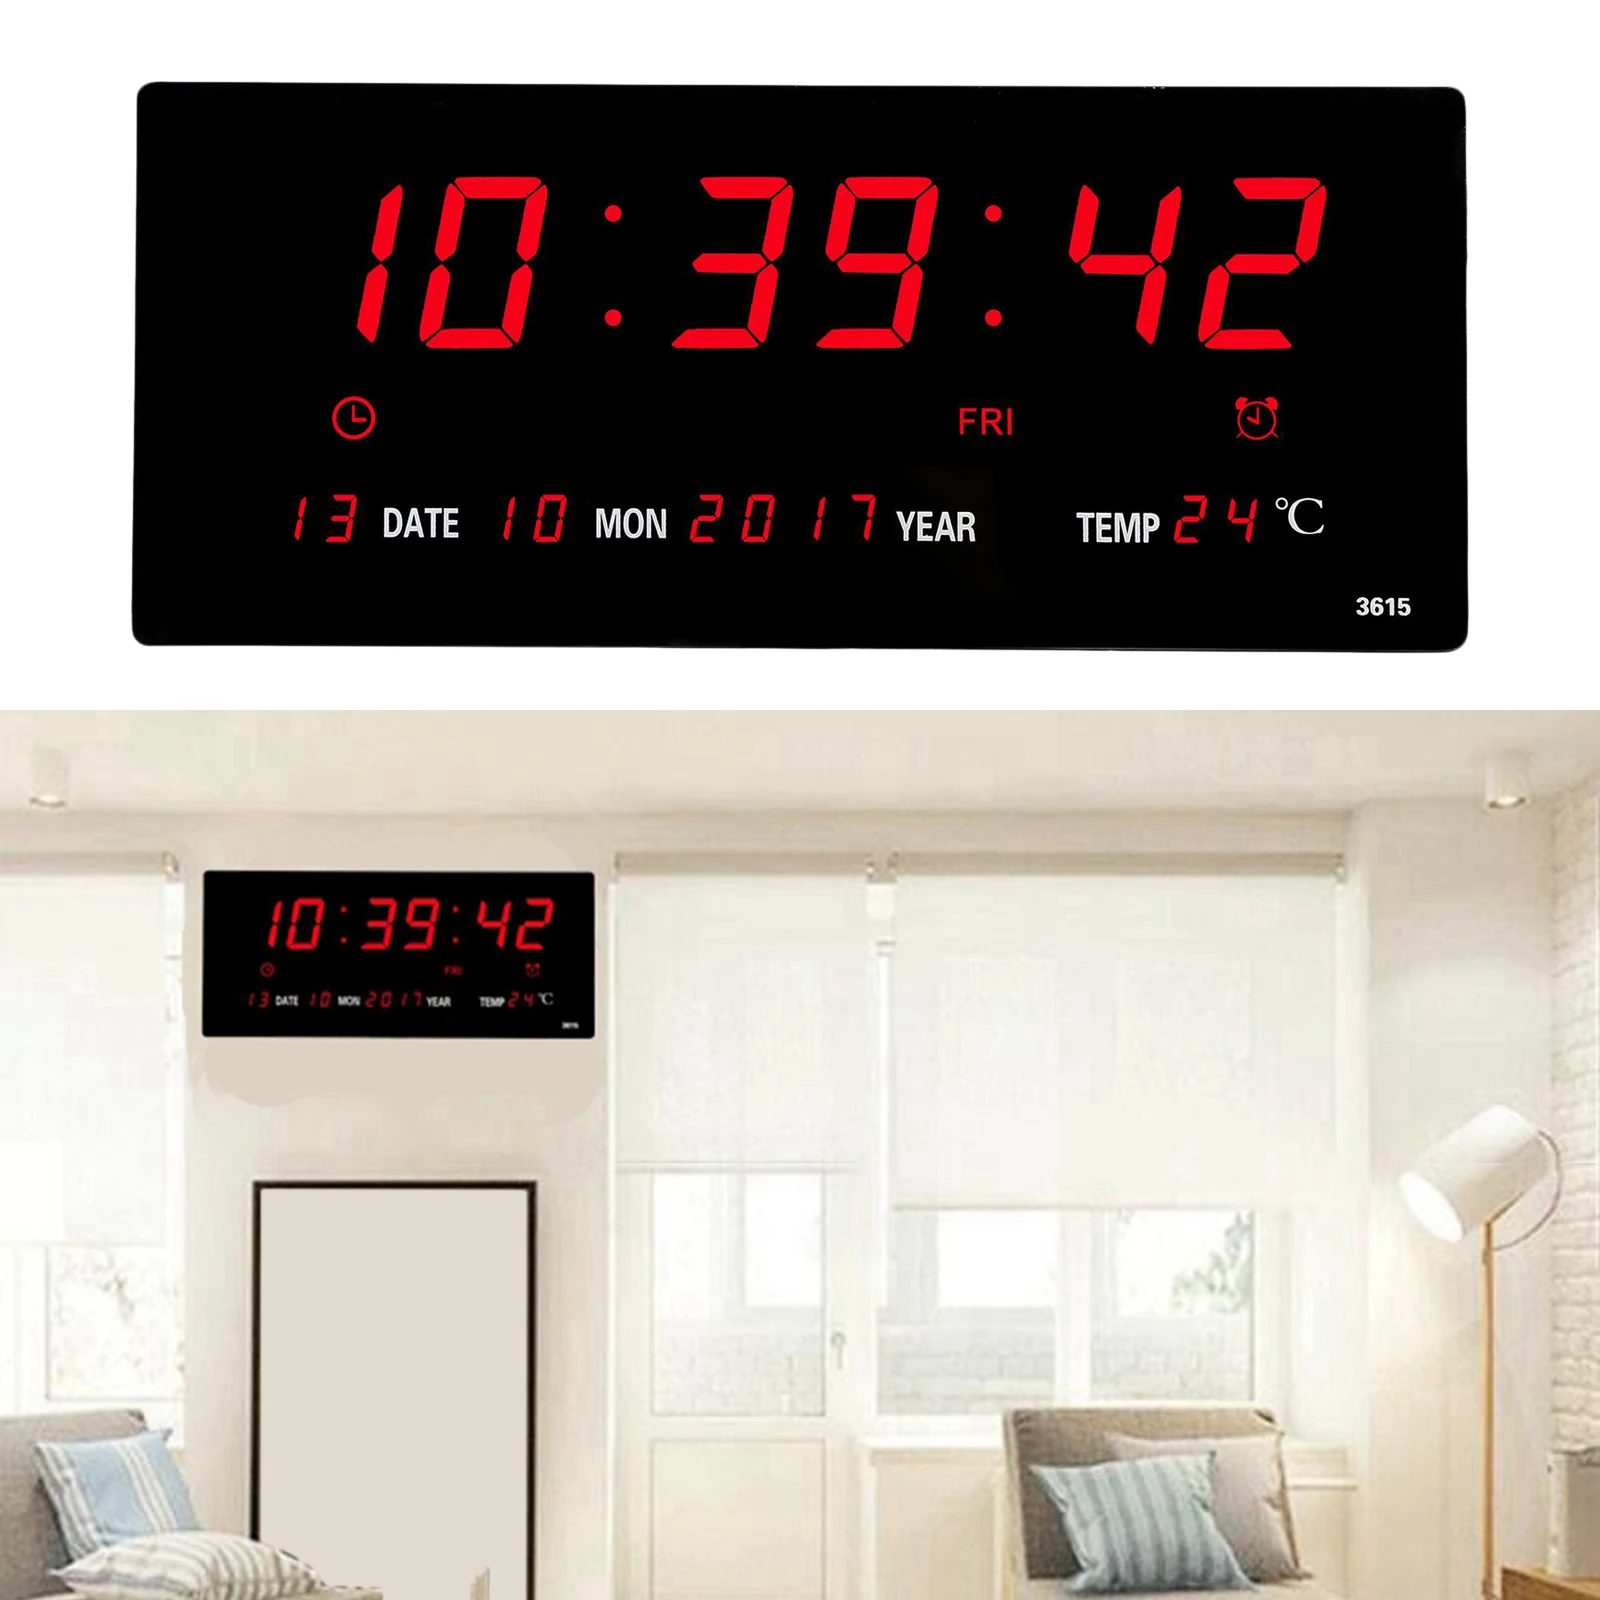 LED Digital Wall Clock Calendar Large Display w/ Indoor Temperature Date and Day